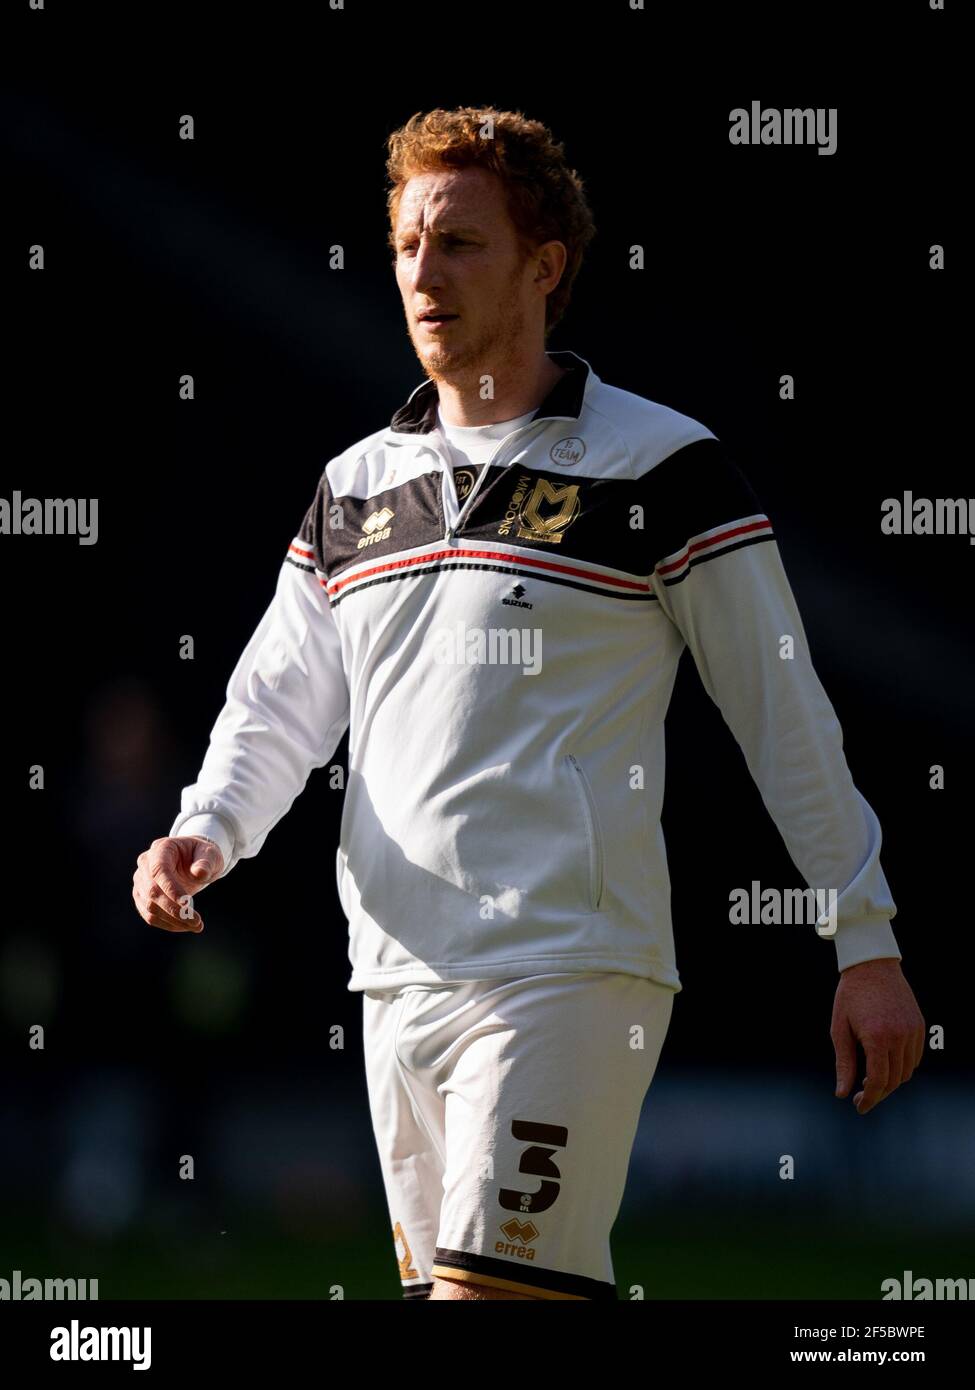 Dean Lewington of MK Dons pre match during the Sky Bet League 1 behind closed doors match between MK Dons and Oxford United at stadium:mk, Milton Keyn Stock Photo